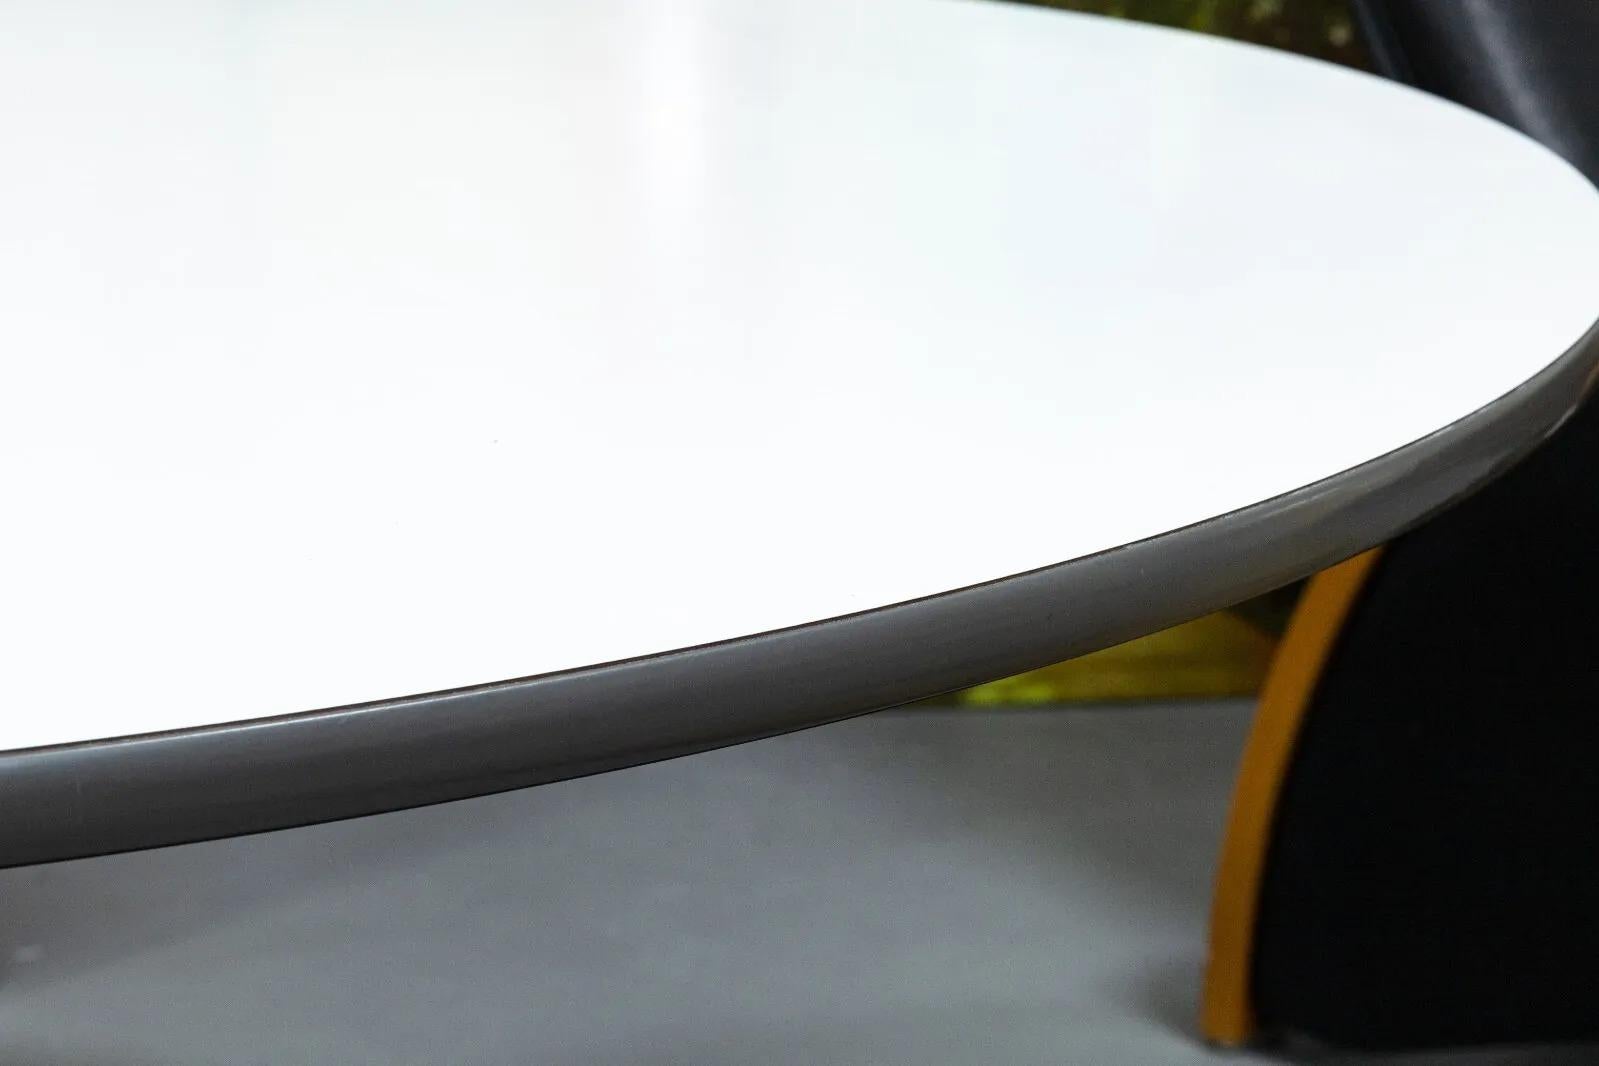 A Herman Miller dinette table. A classic, timeless design from Herman Miller. This dinette table features a wood table top with a white laminate finish, a black vinyl rim, and an aluminum x-shaped base. This table is in very good condition with some